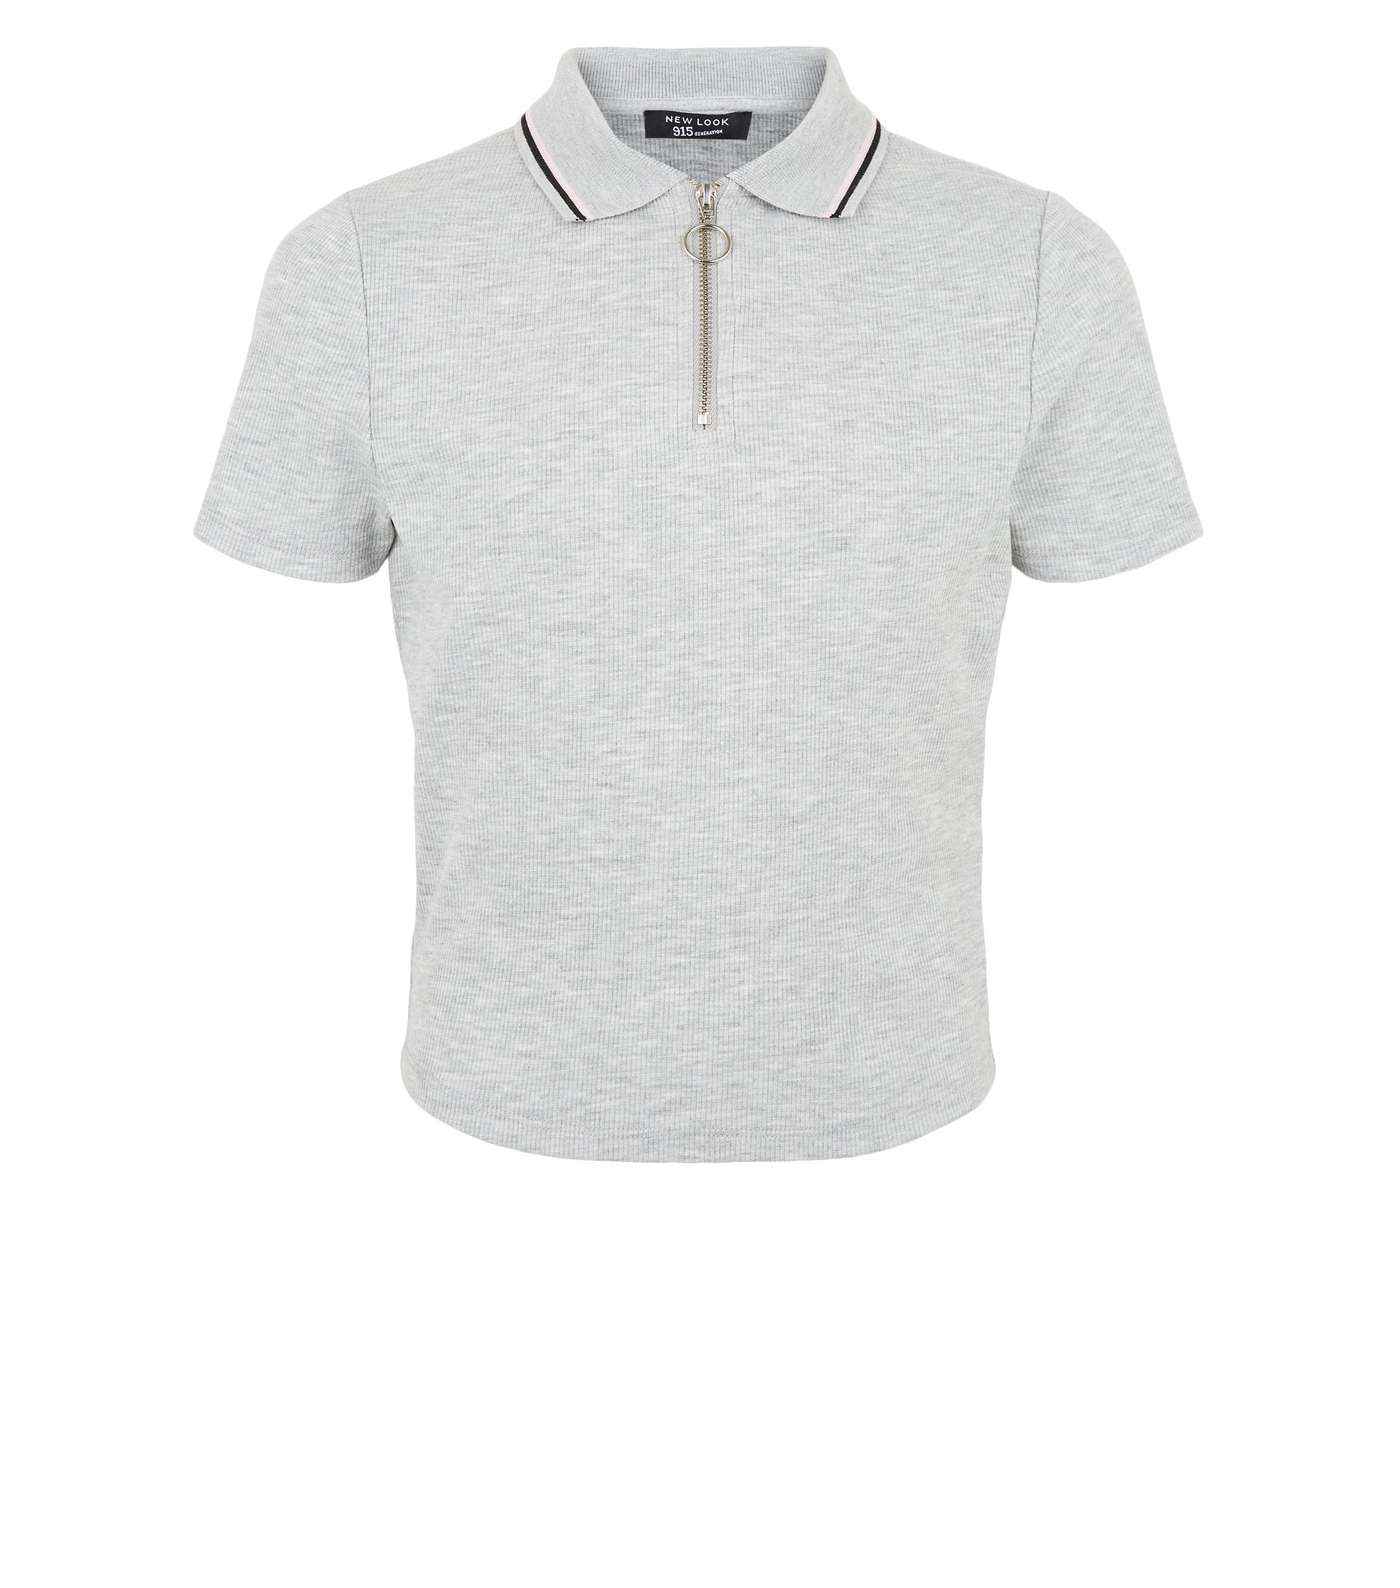 Girls Grey Tipped Zip Up Polo Top Image 4